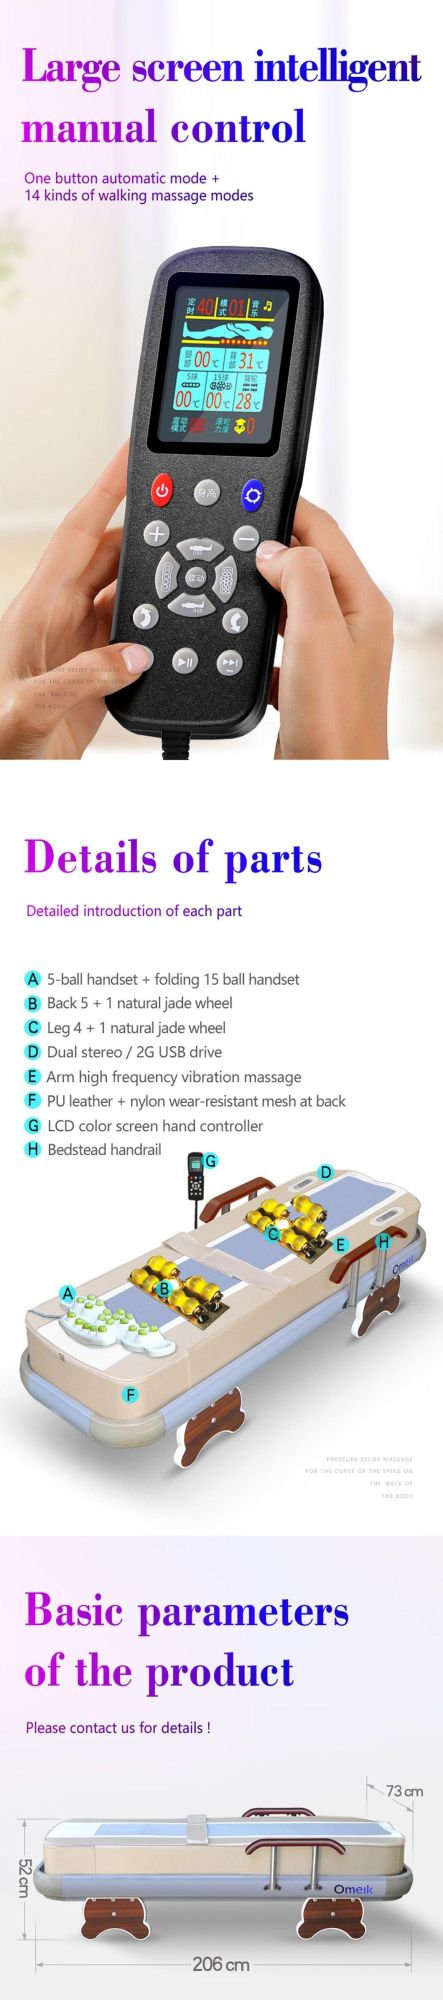 Deluxe New Upgraded Multifunction Jade Heating Physiotherapy Massage Bed Massage Table